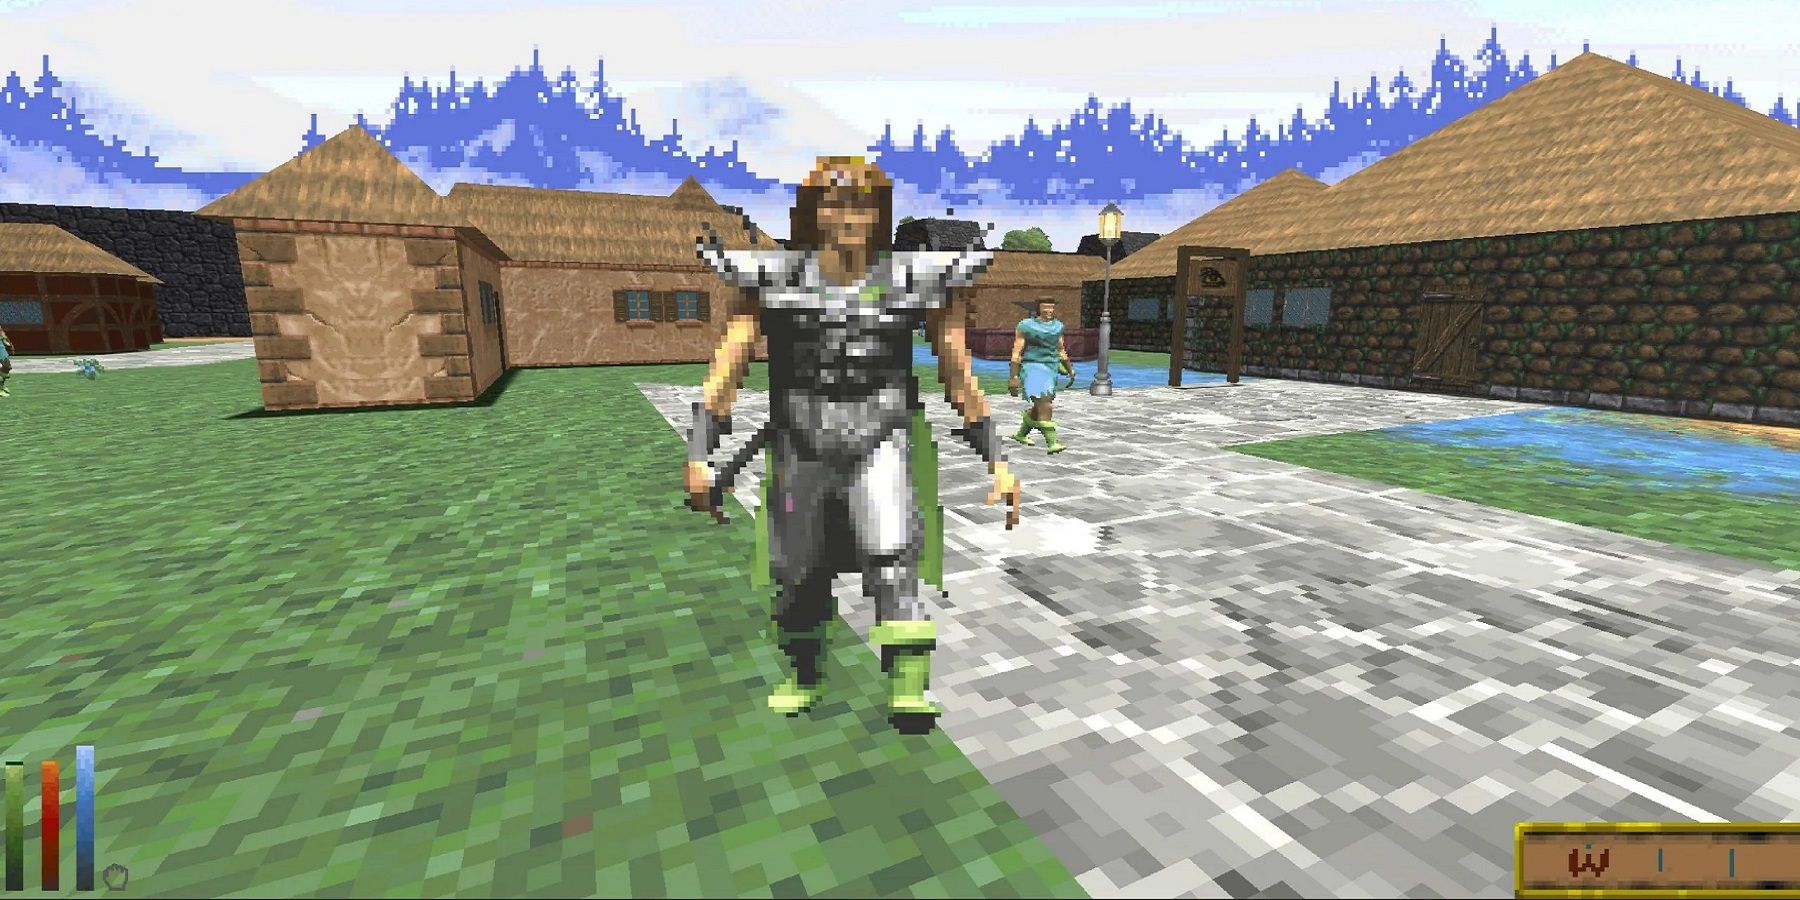 Screenshot from The Elder Scrolls 2: Daggerfall showing the player being approached by an enemy.